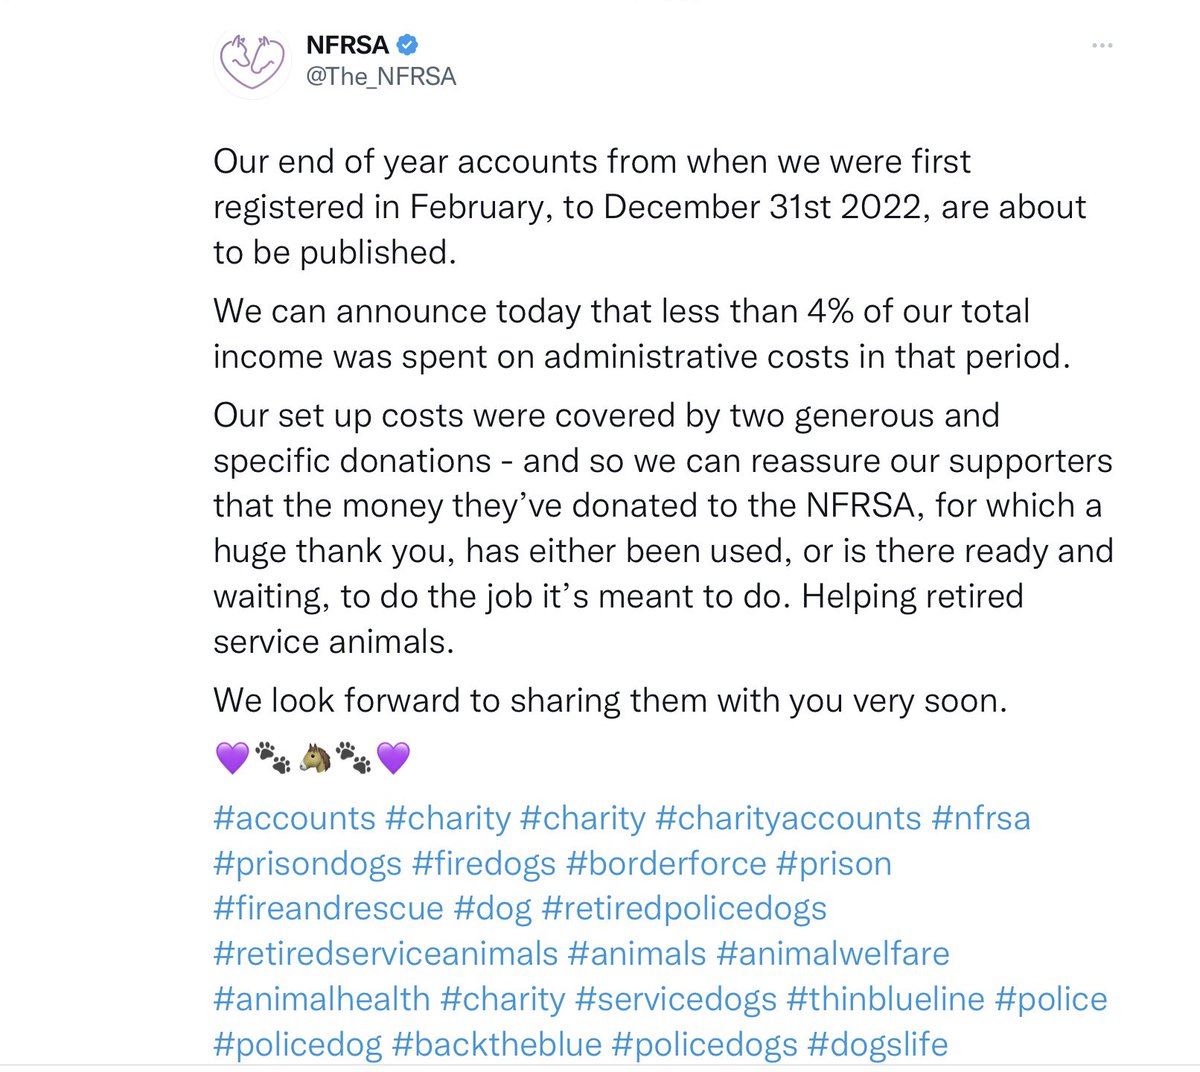 Charities I support @AssociationRPDs @The_NFRSA focus on Welfare Care for RetiredServiceAnimals 
Overheads are kept to a minimum which is essential 
Donations are treated with Respect It’s the Animals that Matter
Account Management is Important 
@K9memorialUk @MA_PurplePoppy